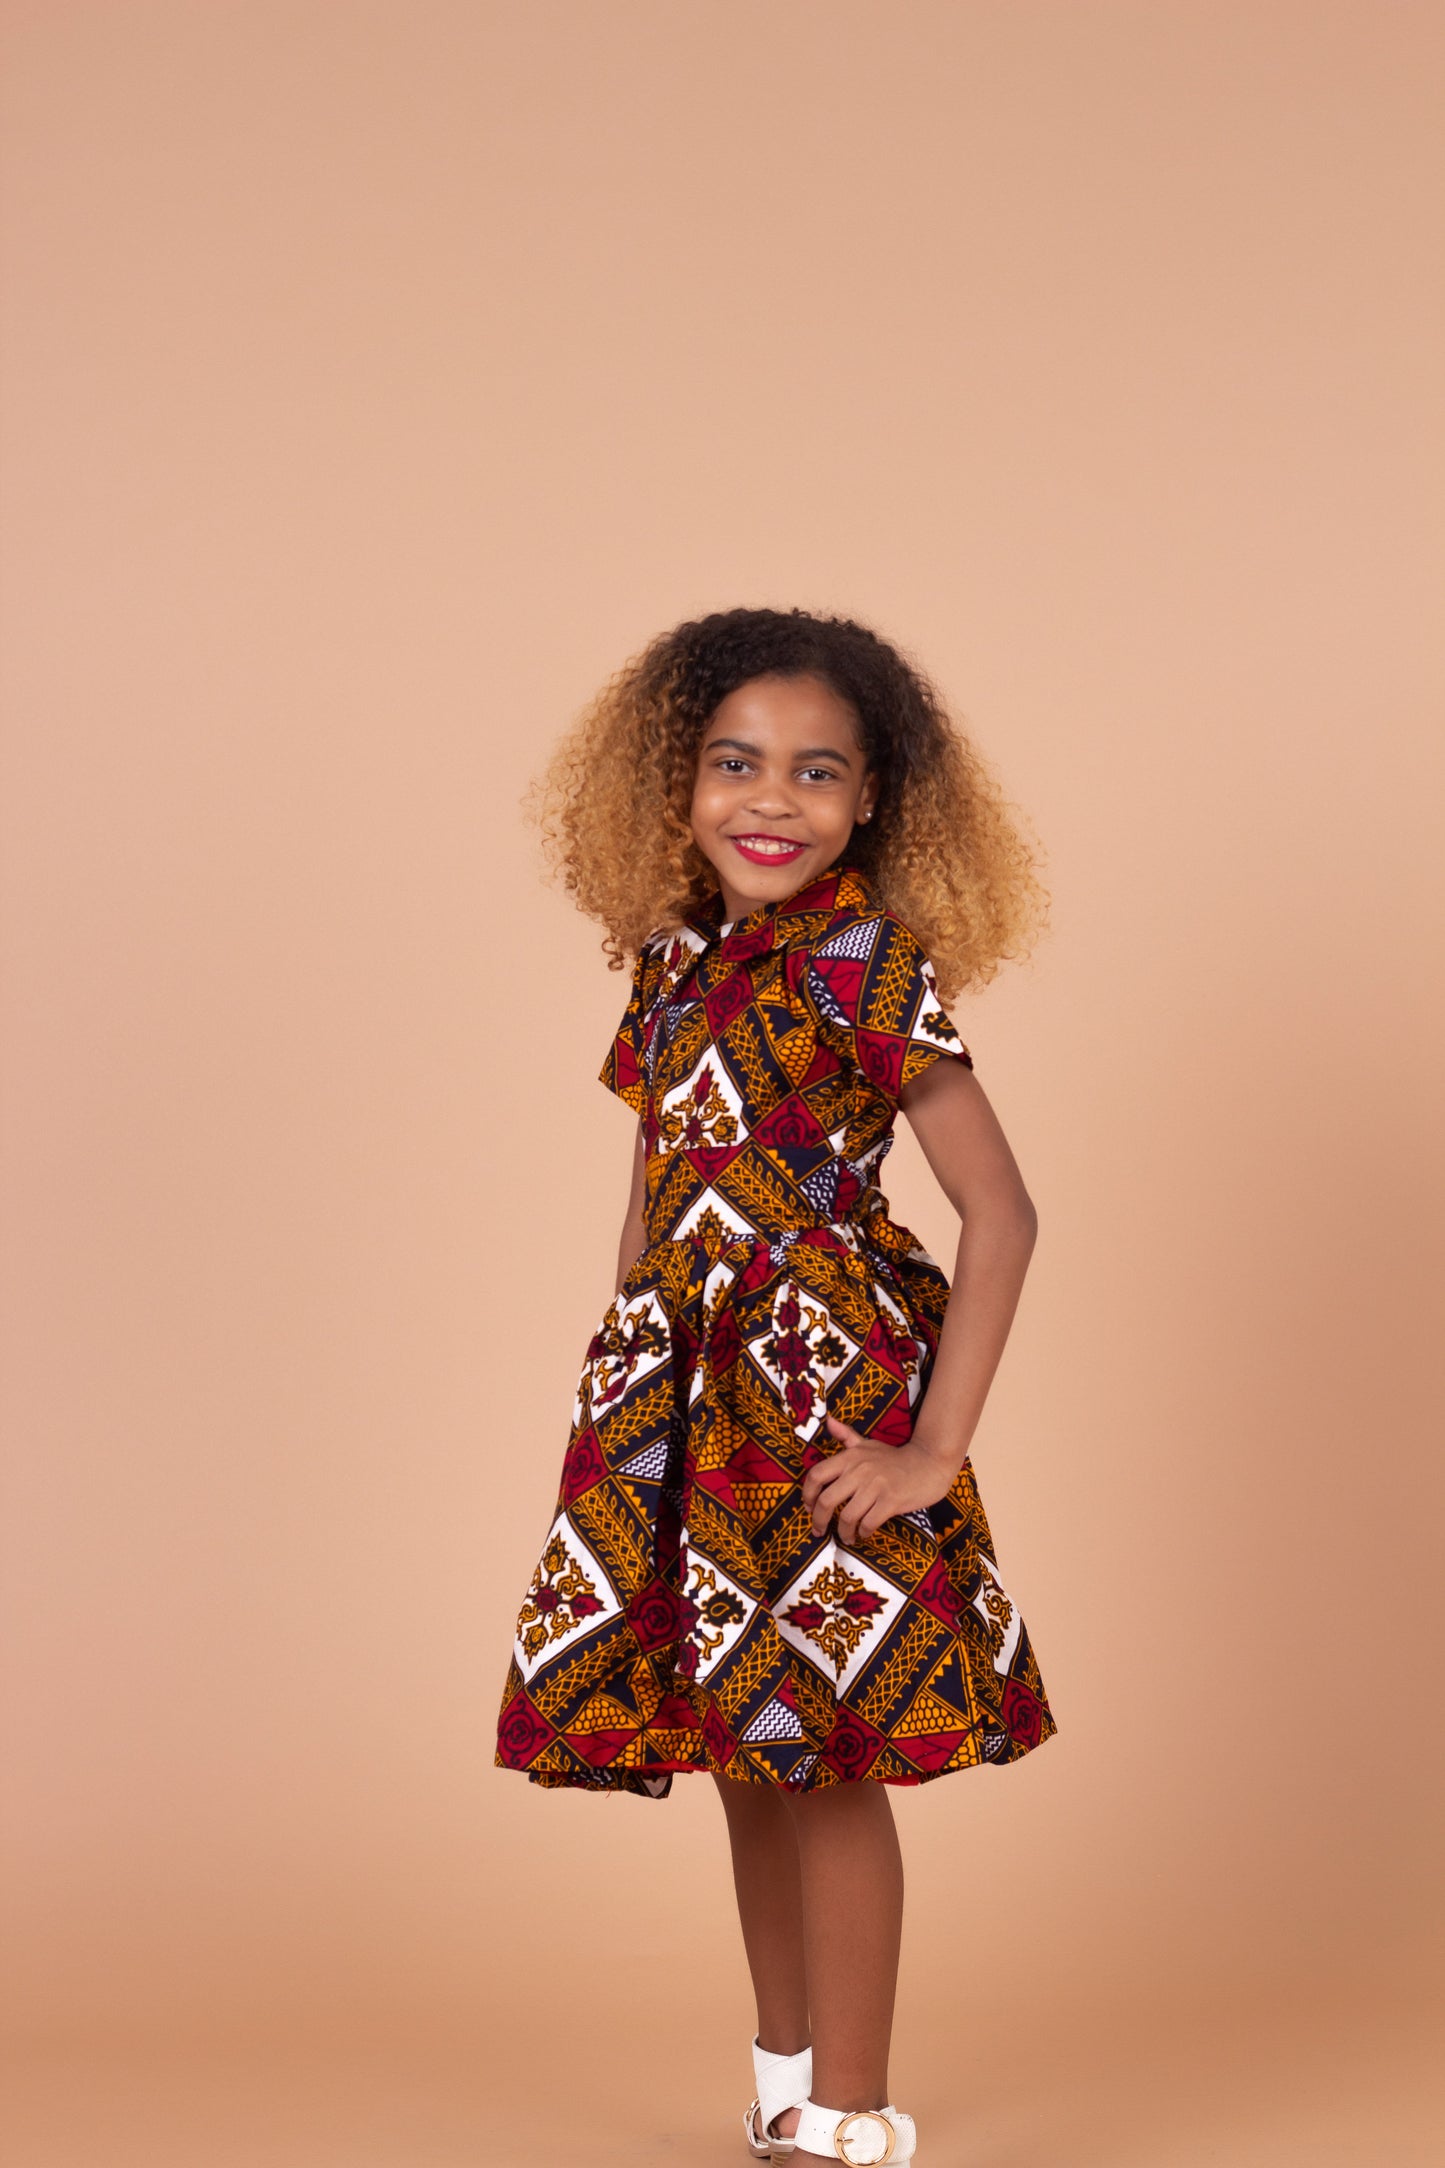  Ankara wax printed Knee length flared belted  dress with short sleeves and collared neckline in Red, yellow, white and black Squared African medallion pattern.